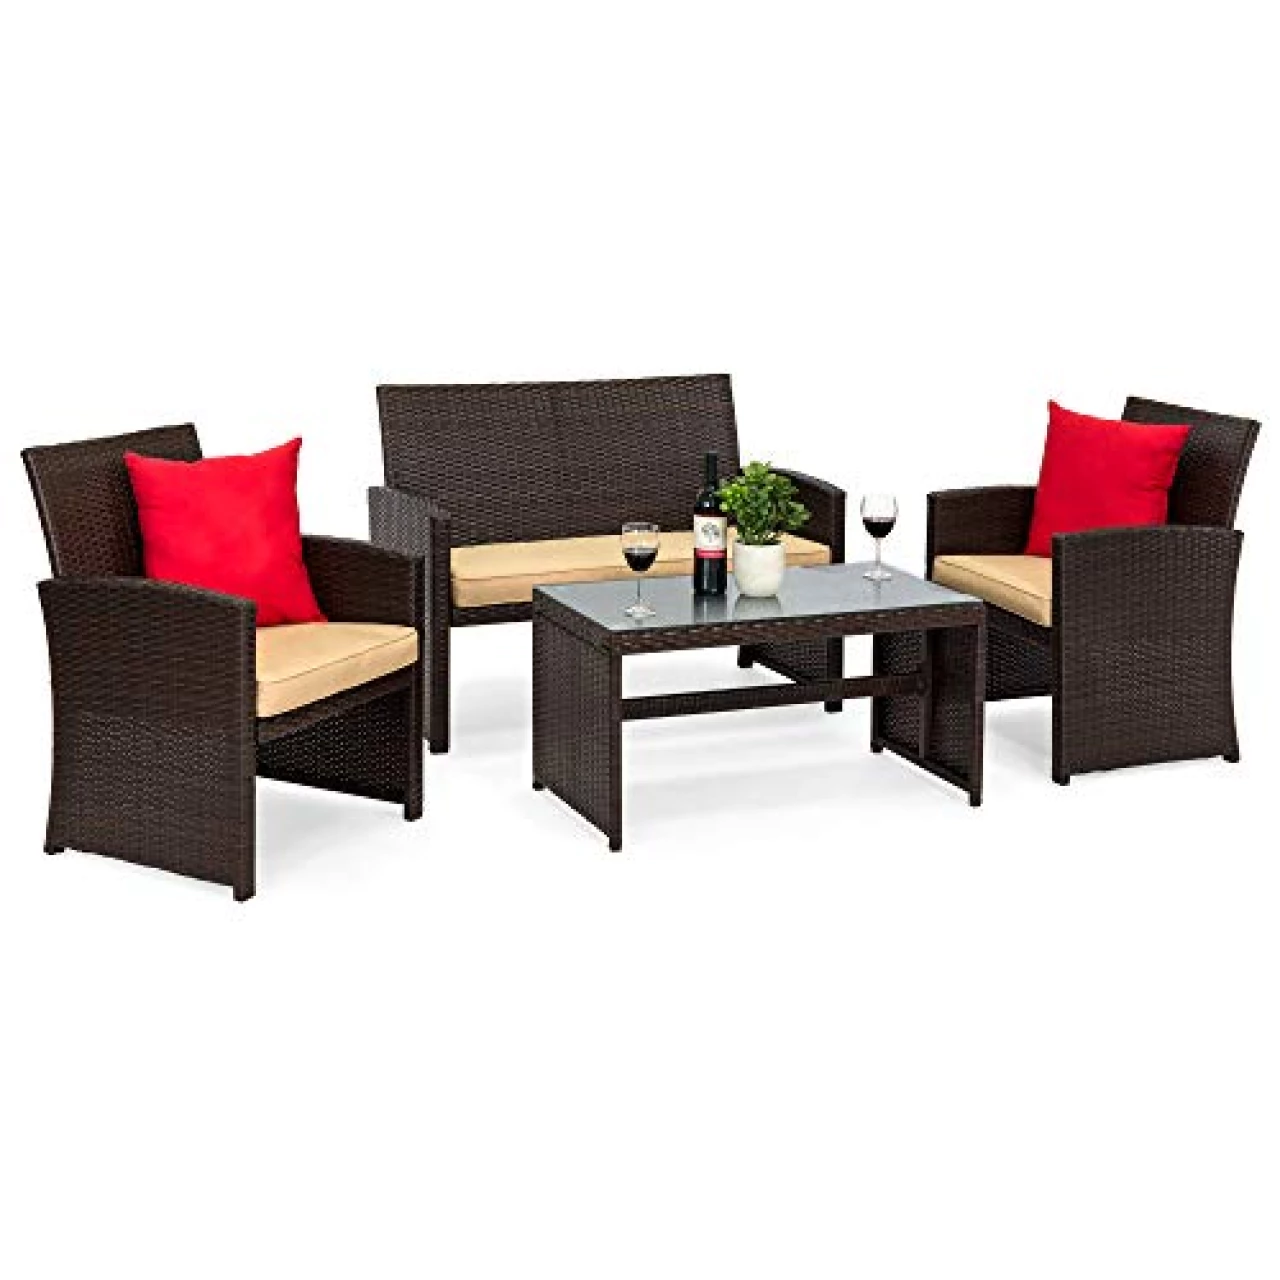 Best Choice Products 4-Piece Outdoor Wicker Patio Conversation Furniture Set